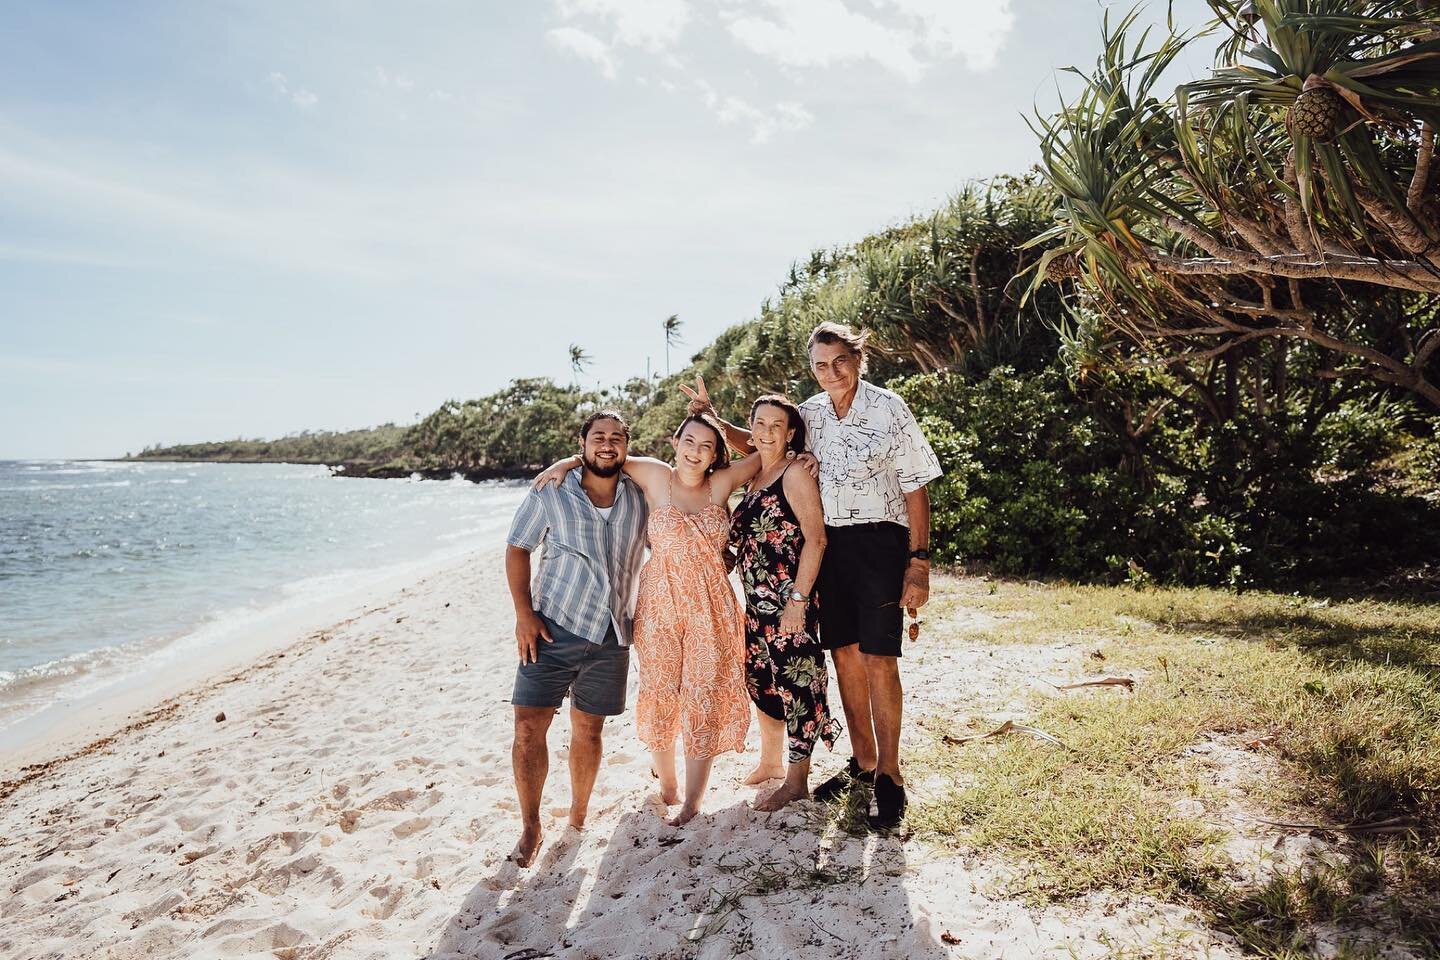 A lovely session with Georgia, her parents, and her boyfriend when visiting her hometown ✨Honeymoon beach on a summer was the perfect location on a hot day, cause you can finish the session in the water 🤪
Loved photographing this fun bunch and their